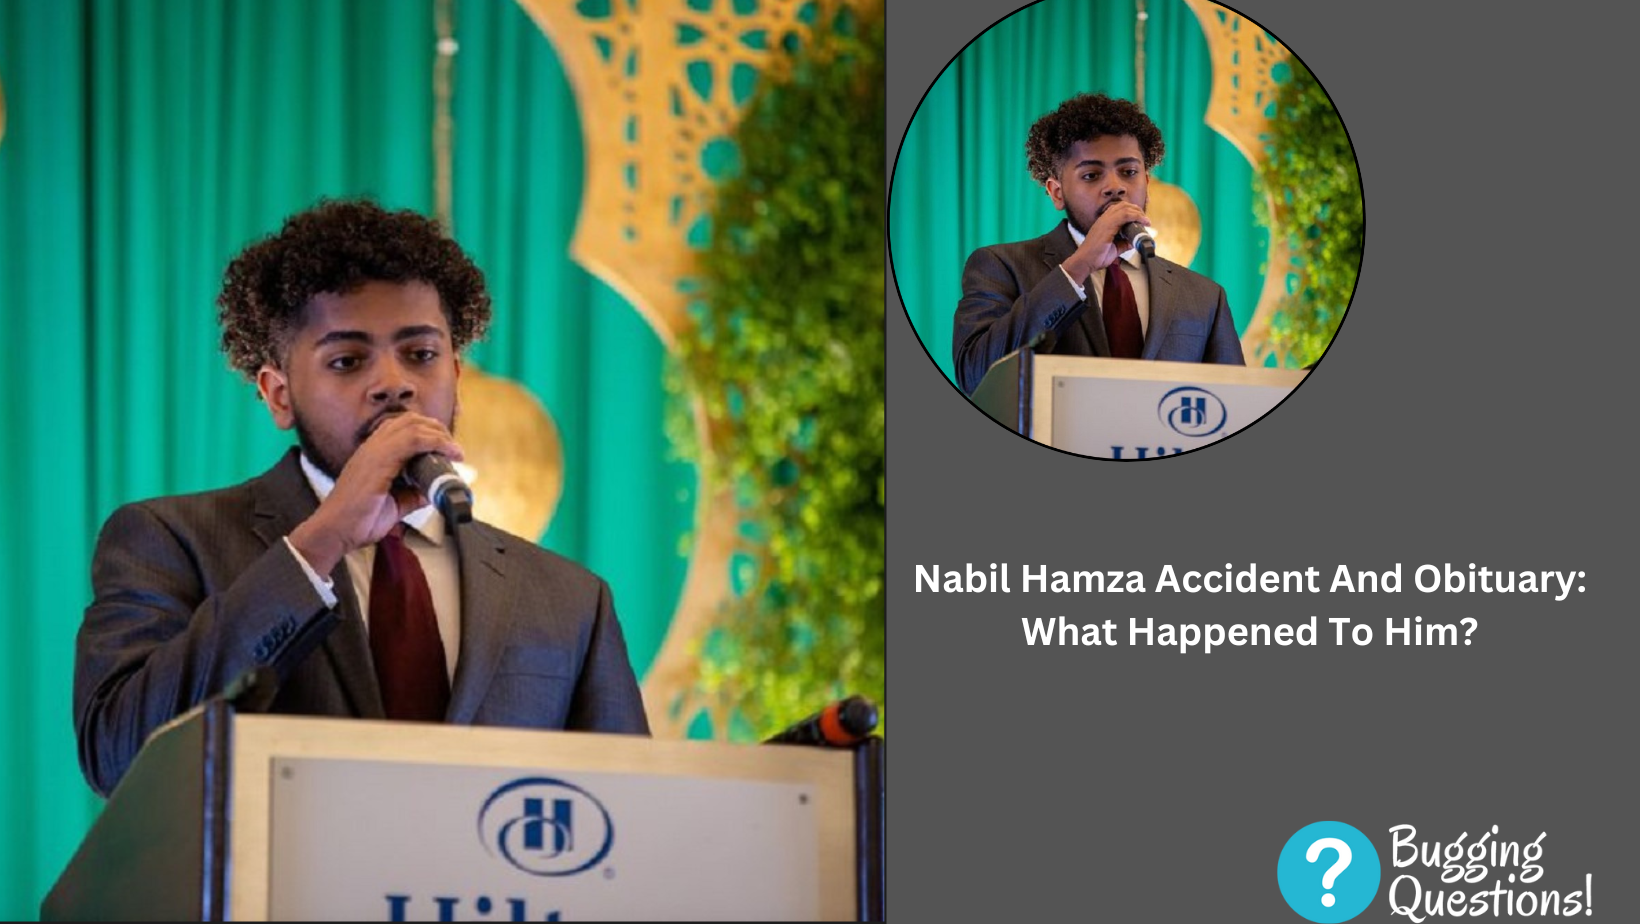 Nabil Hamza Accident And Obituary: What Happened To Him?